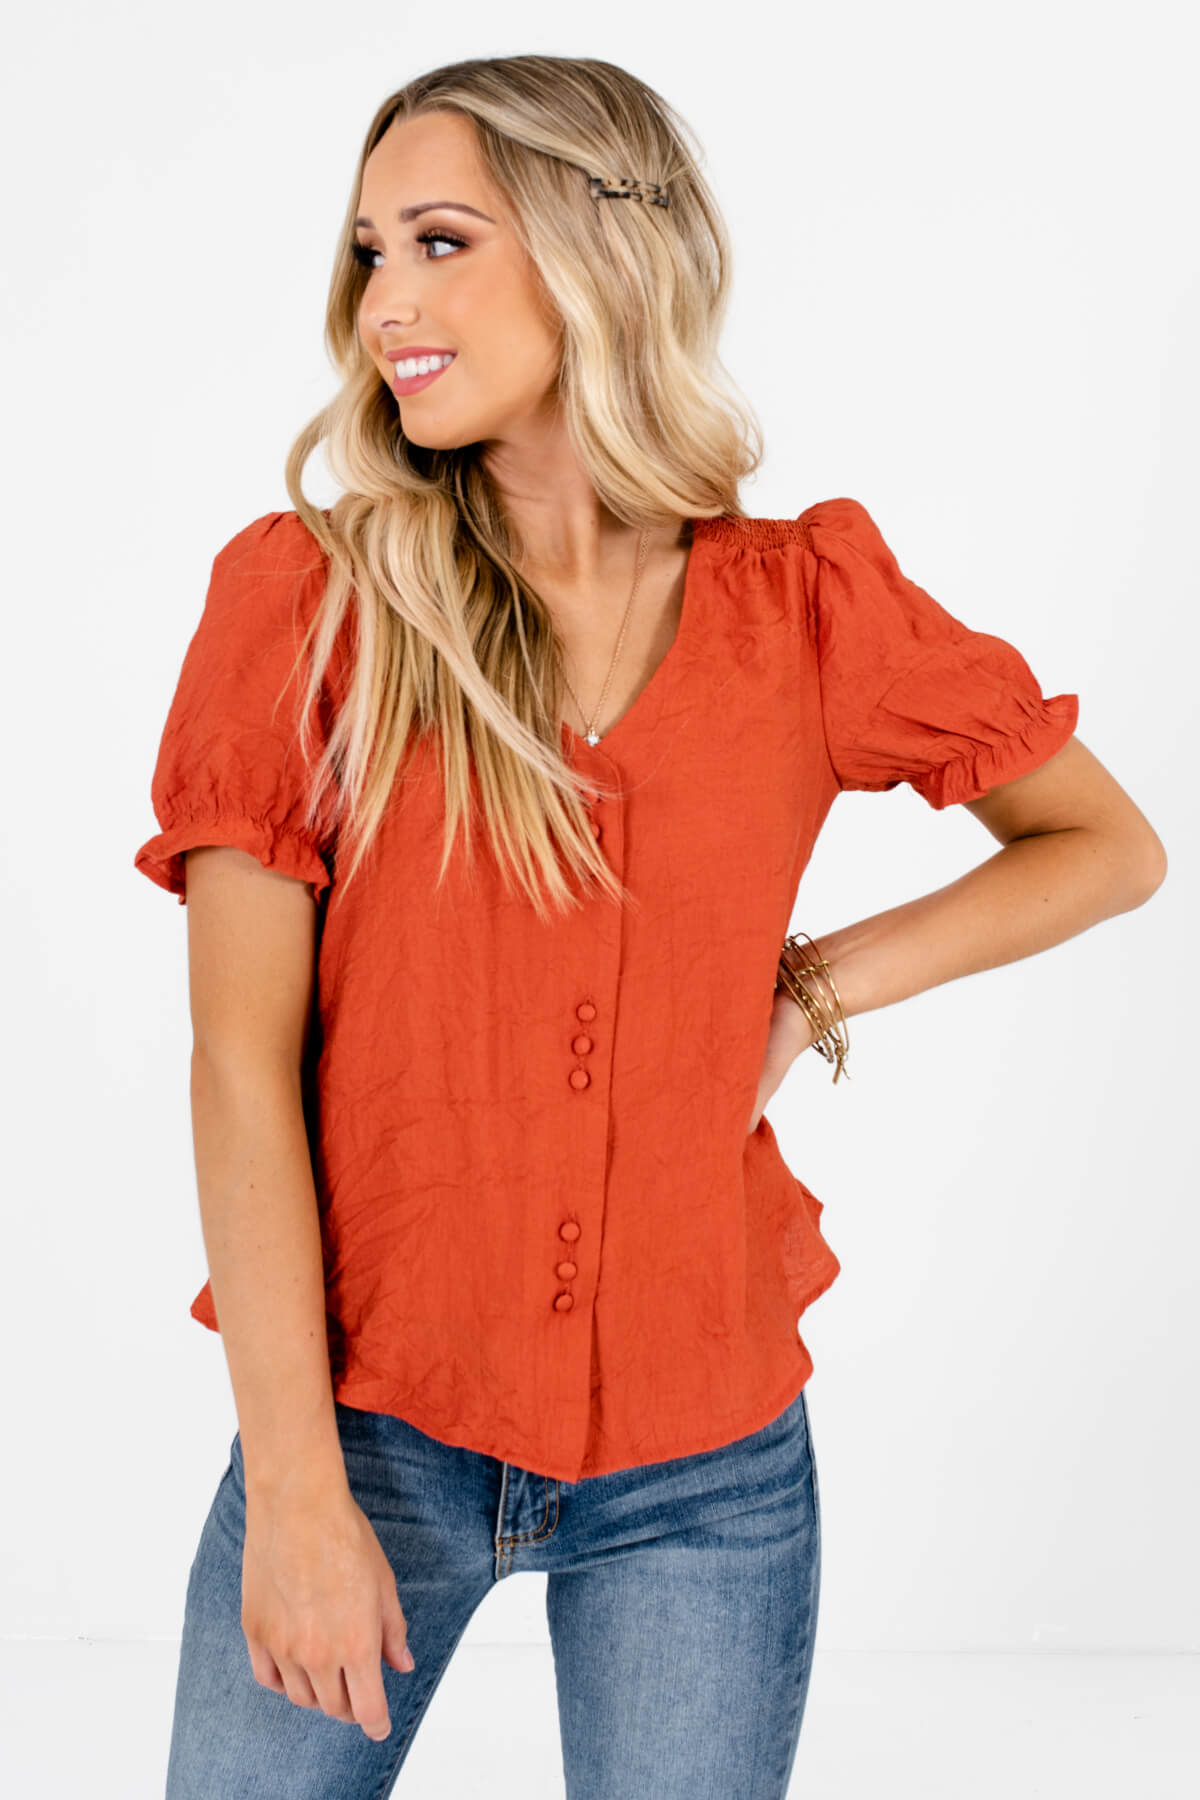 Rust Orange Cute and Comfortable Boutique Tops for Women